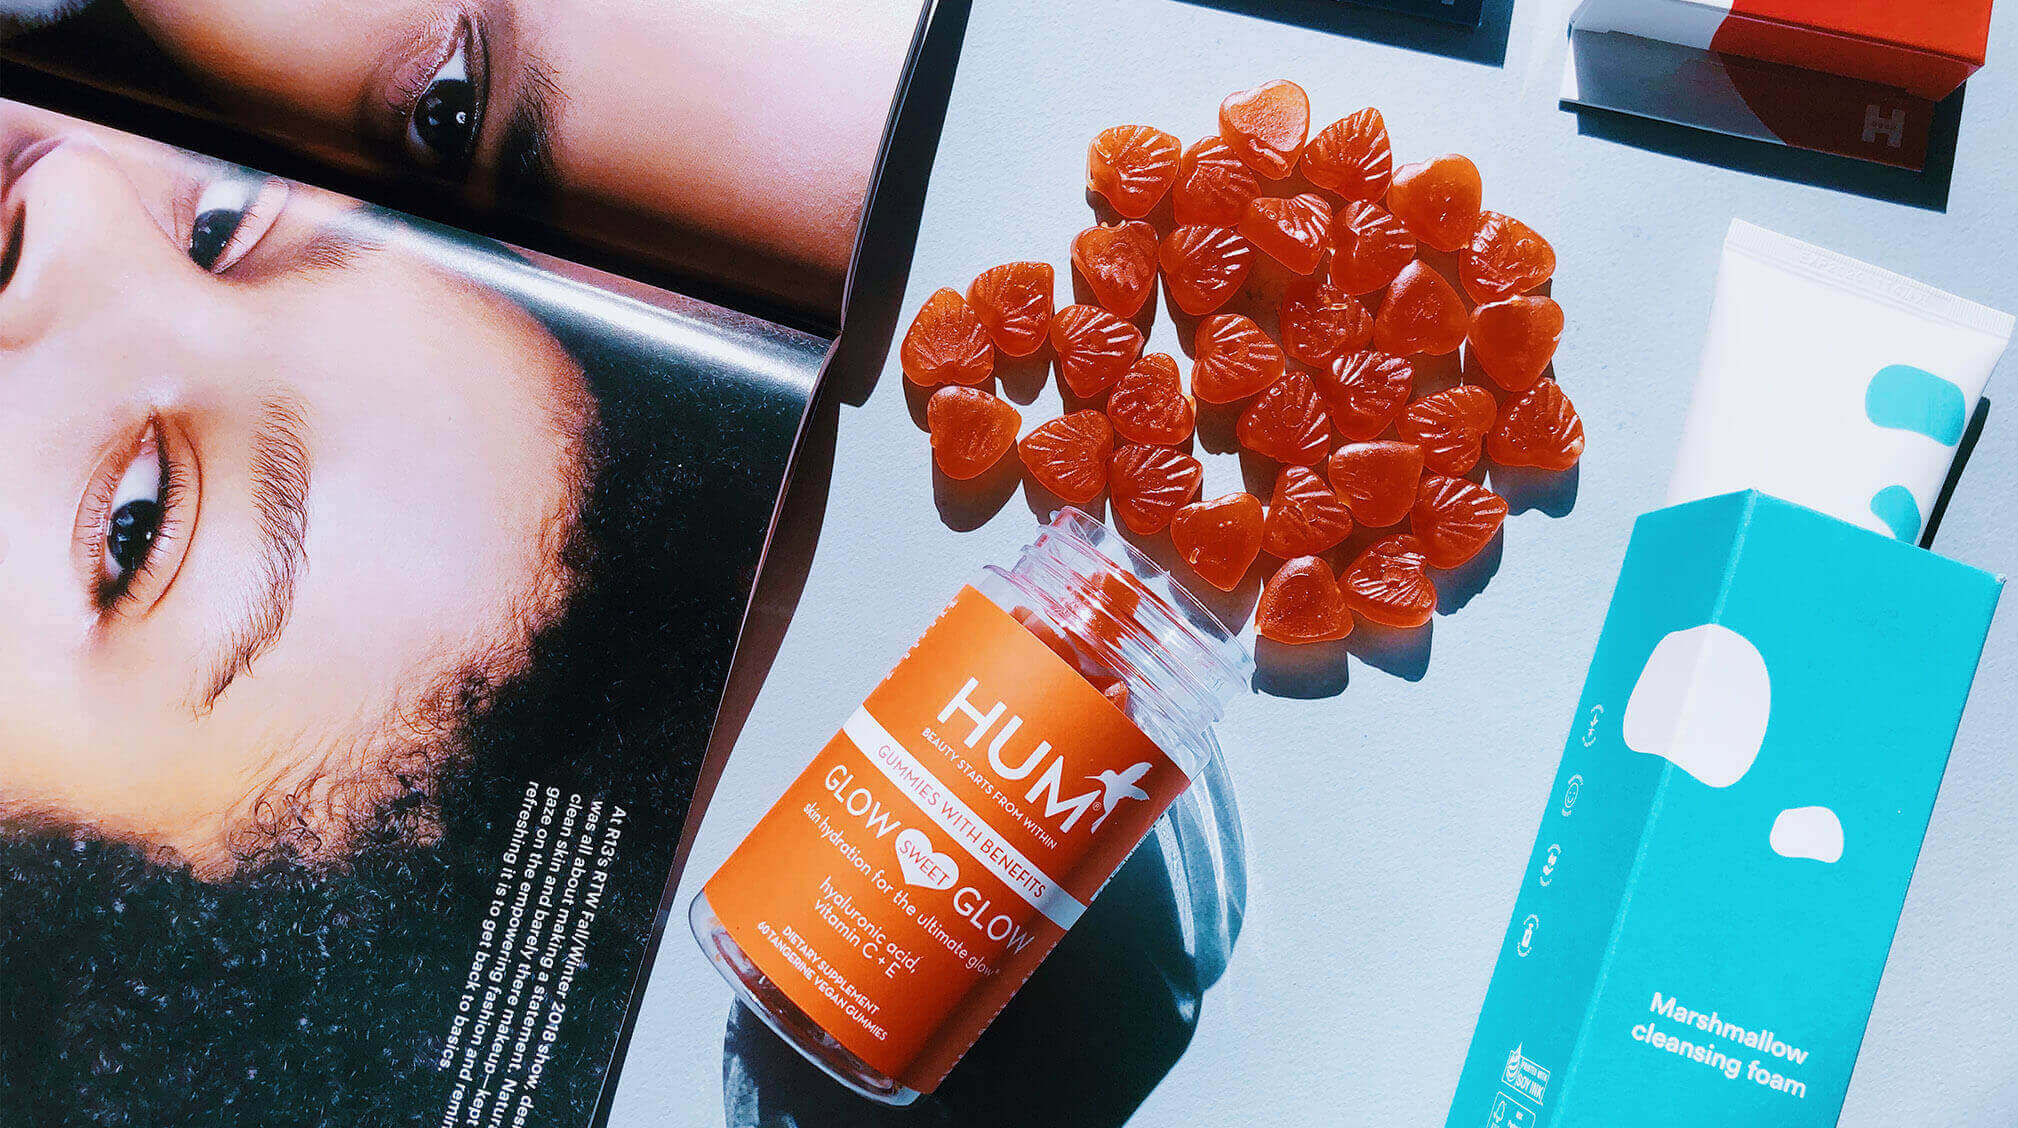 Hum Nutrition Glow Sweet Glow gummies spilling out of contain with Enature Marshmallow cleansing foam